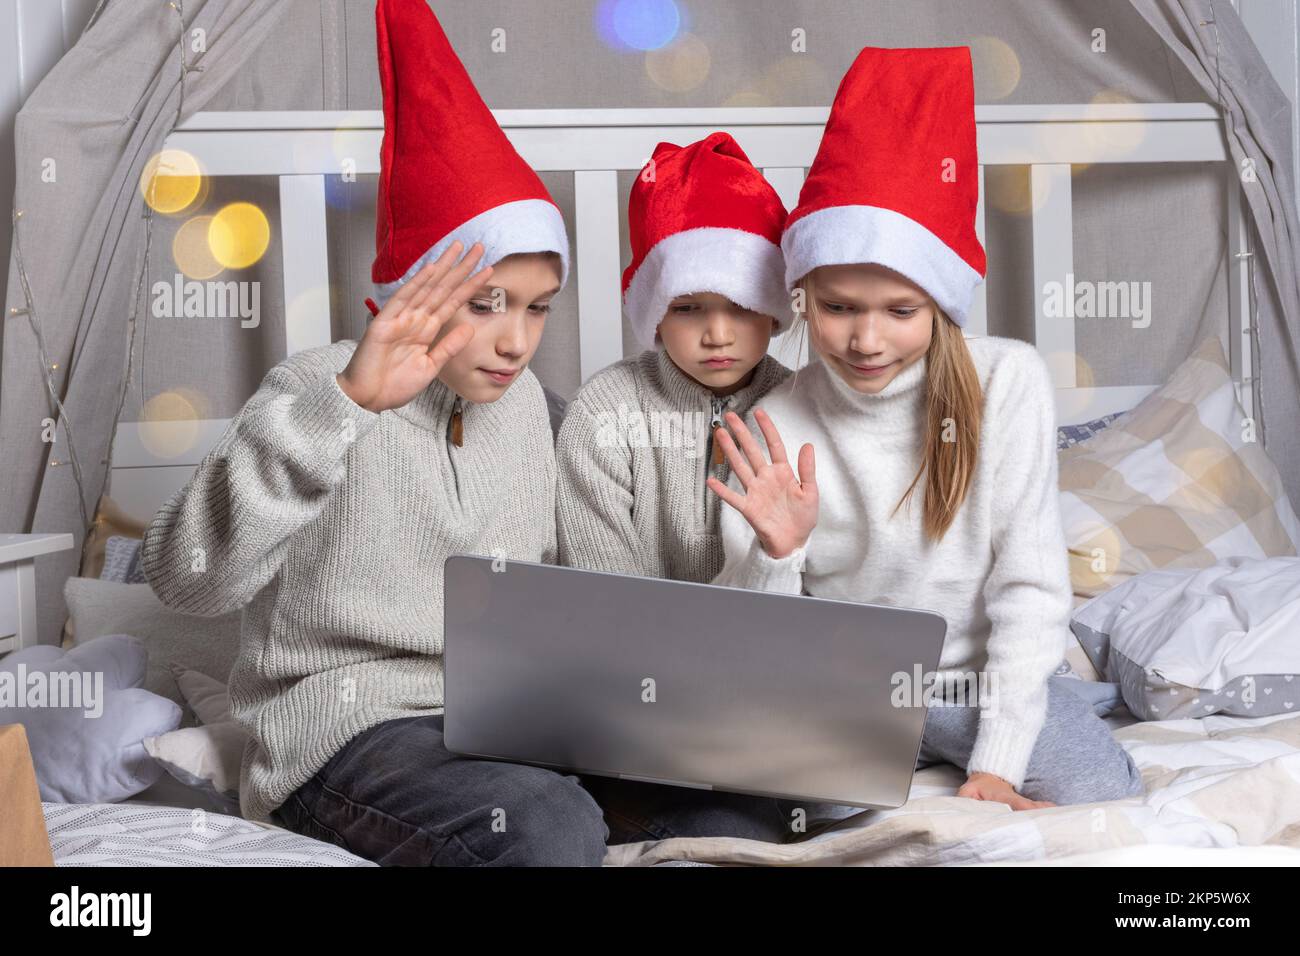 Happy kids in red Santa hats with a laptop on Christmas Eve at home. Boys and a girl online congratulate relatives sitting on the bed. Family x-mas ev Stock Photo